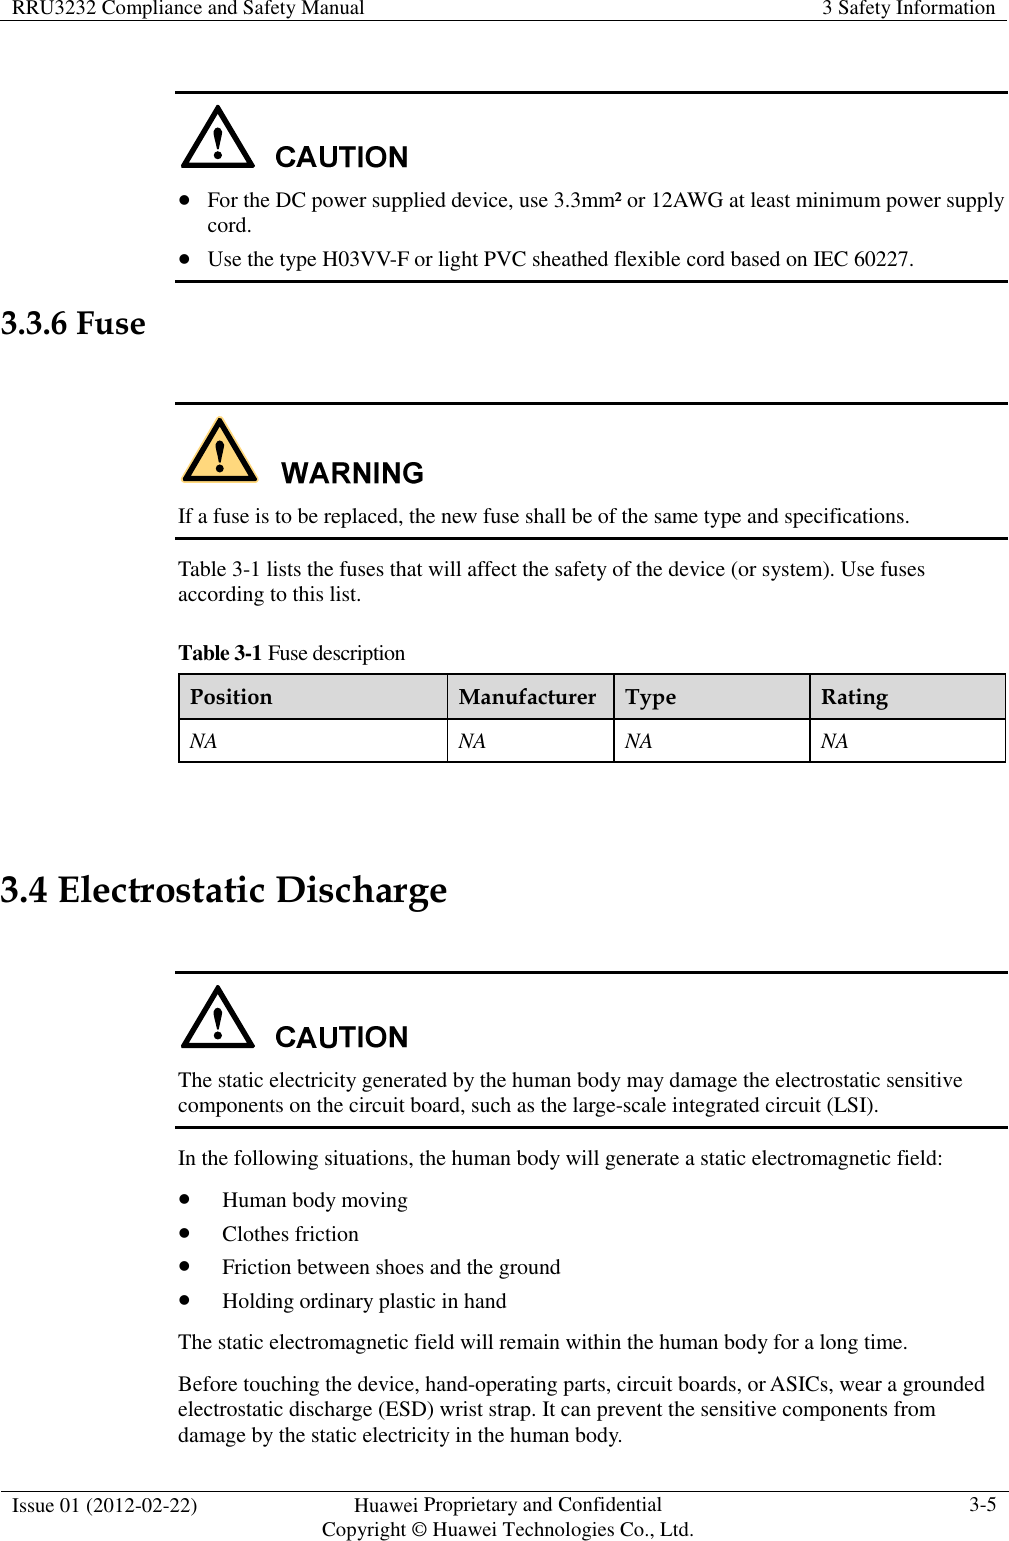 RRU3232 Compliance and Safety Manual  3 Safety Information  Issue 01 (2012-02-22)  Huawei Proprietary and Confidential           Copyright © Huawei Technologies Co., Ltd. 3-5     For the DC power supplied device, use 3.3mm² or 12AWG at least minimum power supply cord.  Use the type H03VV-F or light PVC sheathed flexible cord based on IEC 60227. 3.3.6 Fuse   If a fuse is to be replaced, the new fuse shall be of the same type and specifications. Table 3-1 lists the fuses that will affect the safety of the device (or system). Use fuses according to this list. Table 3-1 Fuse description Position  Manufacturer Type  Rating NA  NA  NA  NA  3.4 Electrostatic Discharge   The static electricity generated by the human body may damage the electrostatic sensitive components on the circuit board, such as the large-scale integrated circuit (LSI). In the following situations, the human body will generate a static electromagnetic field:  Human body moving  Clothes friction  Friction between shoes and the ground  Holding ordinary plastic in hand The static electromagnetic field will remain within the human body for a long time. Before touching the device, hand-operating parts, circuit boards, or ASICs, wear a grounded electrostatic discharge (ESD) wrist strap. It can prevent the sensitive components from damage by the static electricity in the human body. 